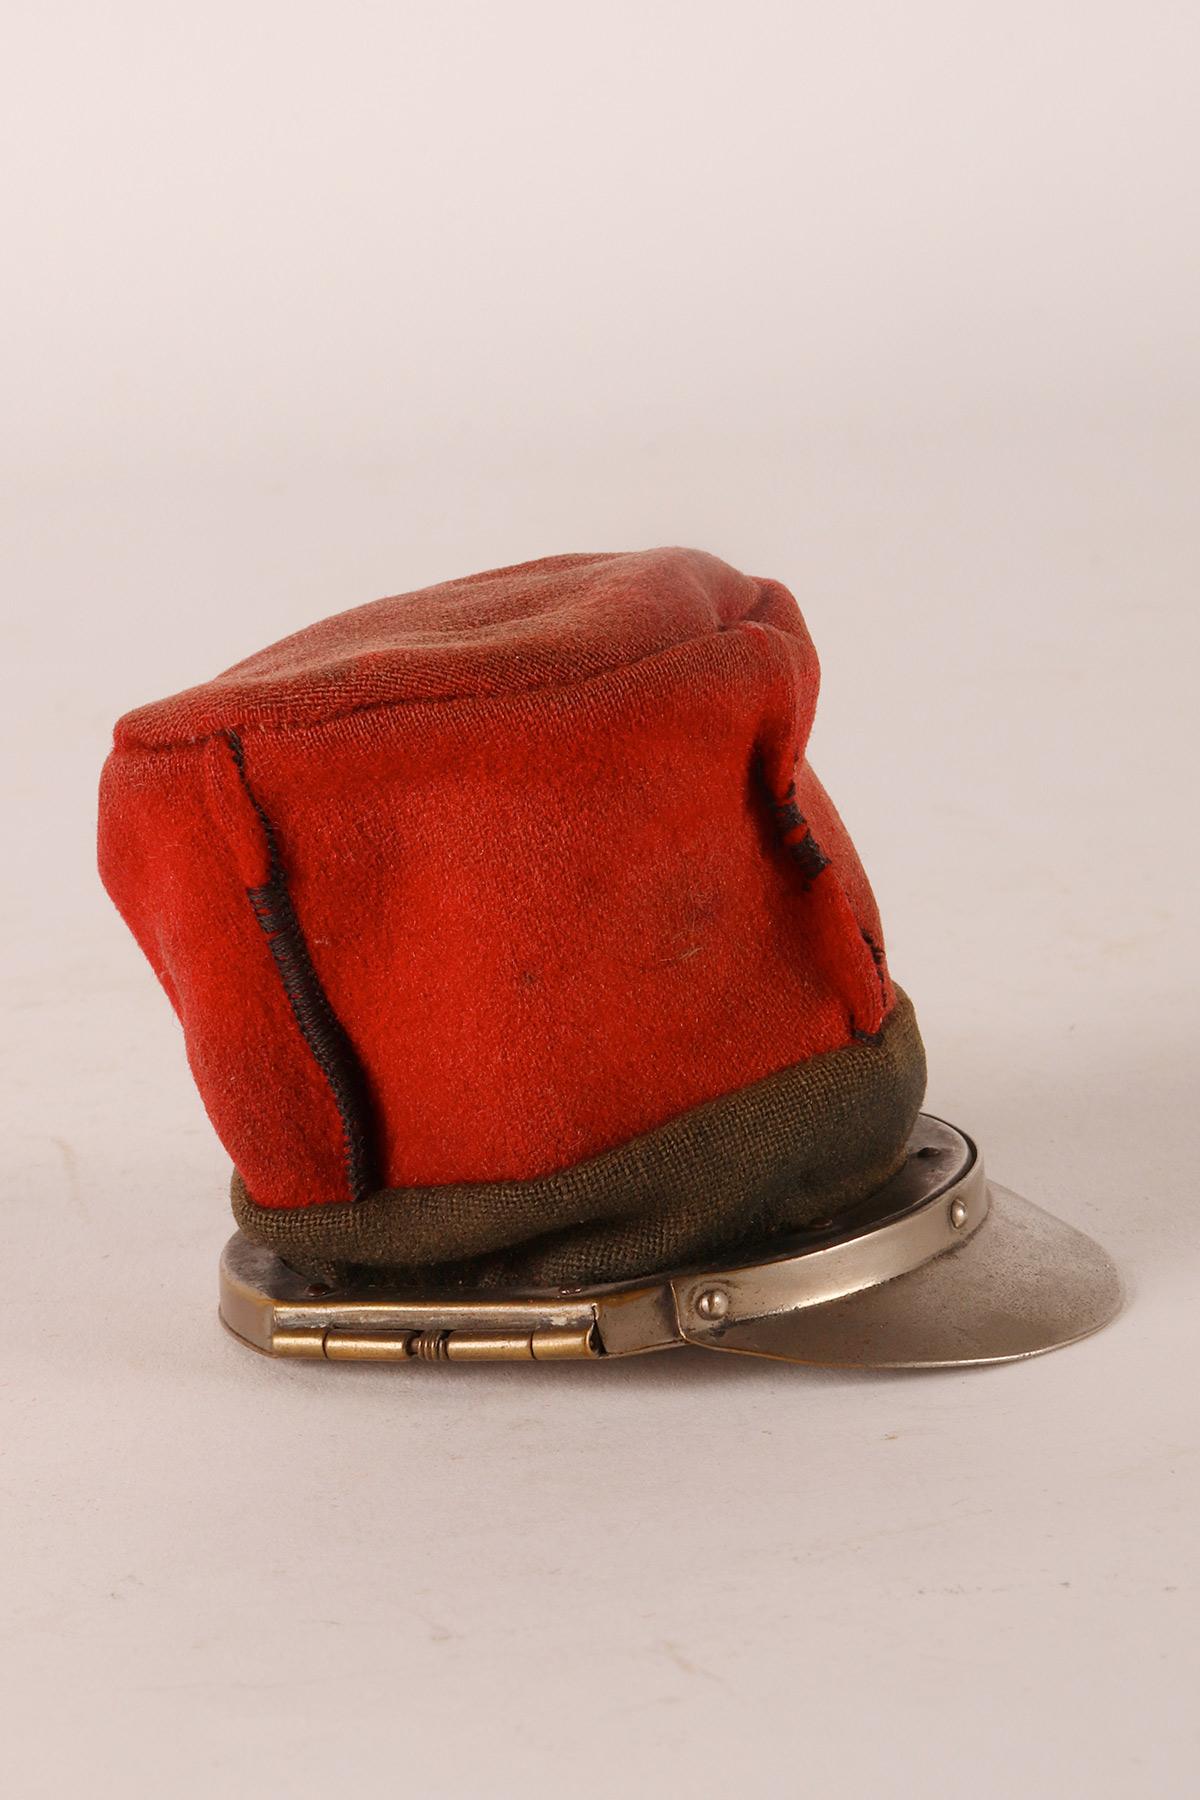 French A military cap snuffbox, Paris, France beginning of 20th century. For Sale